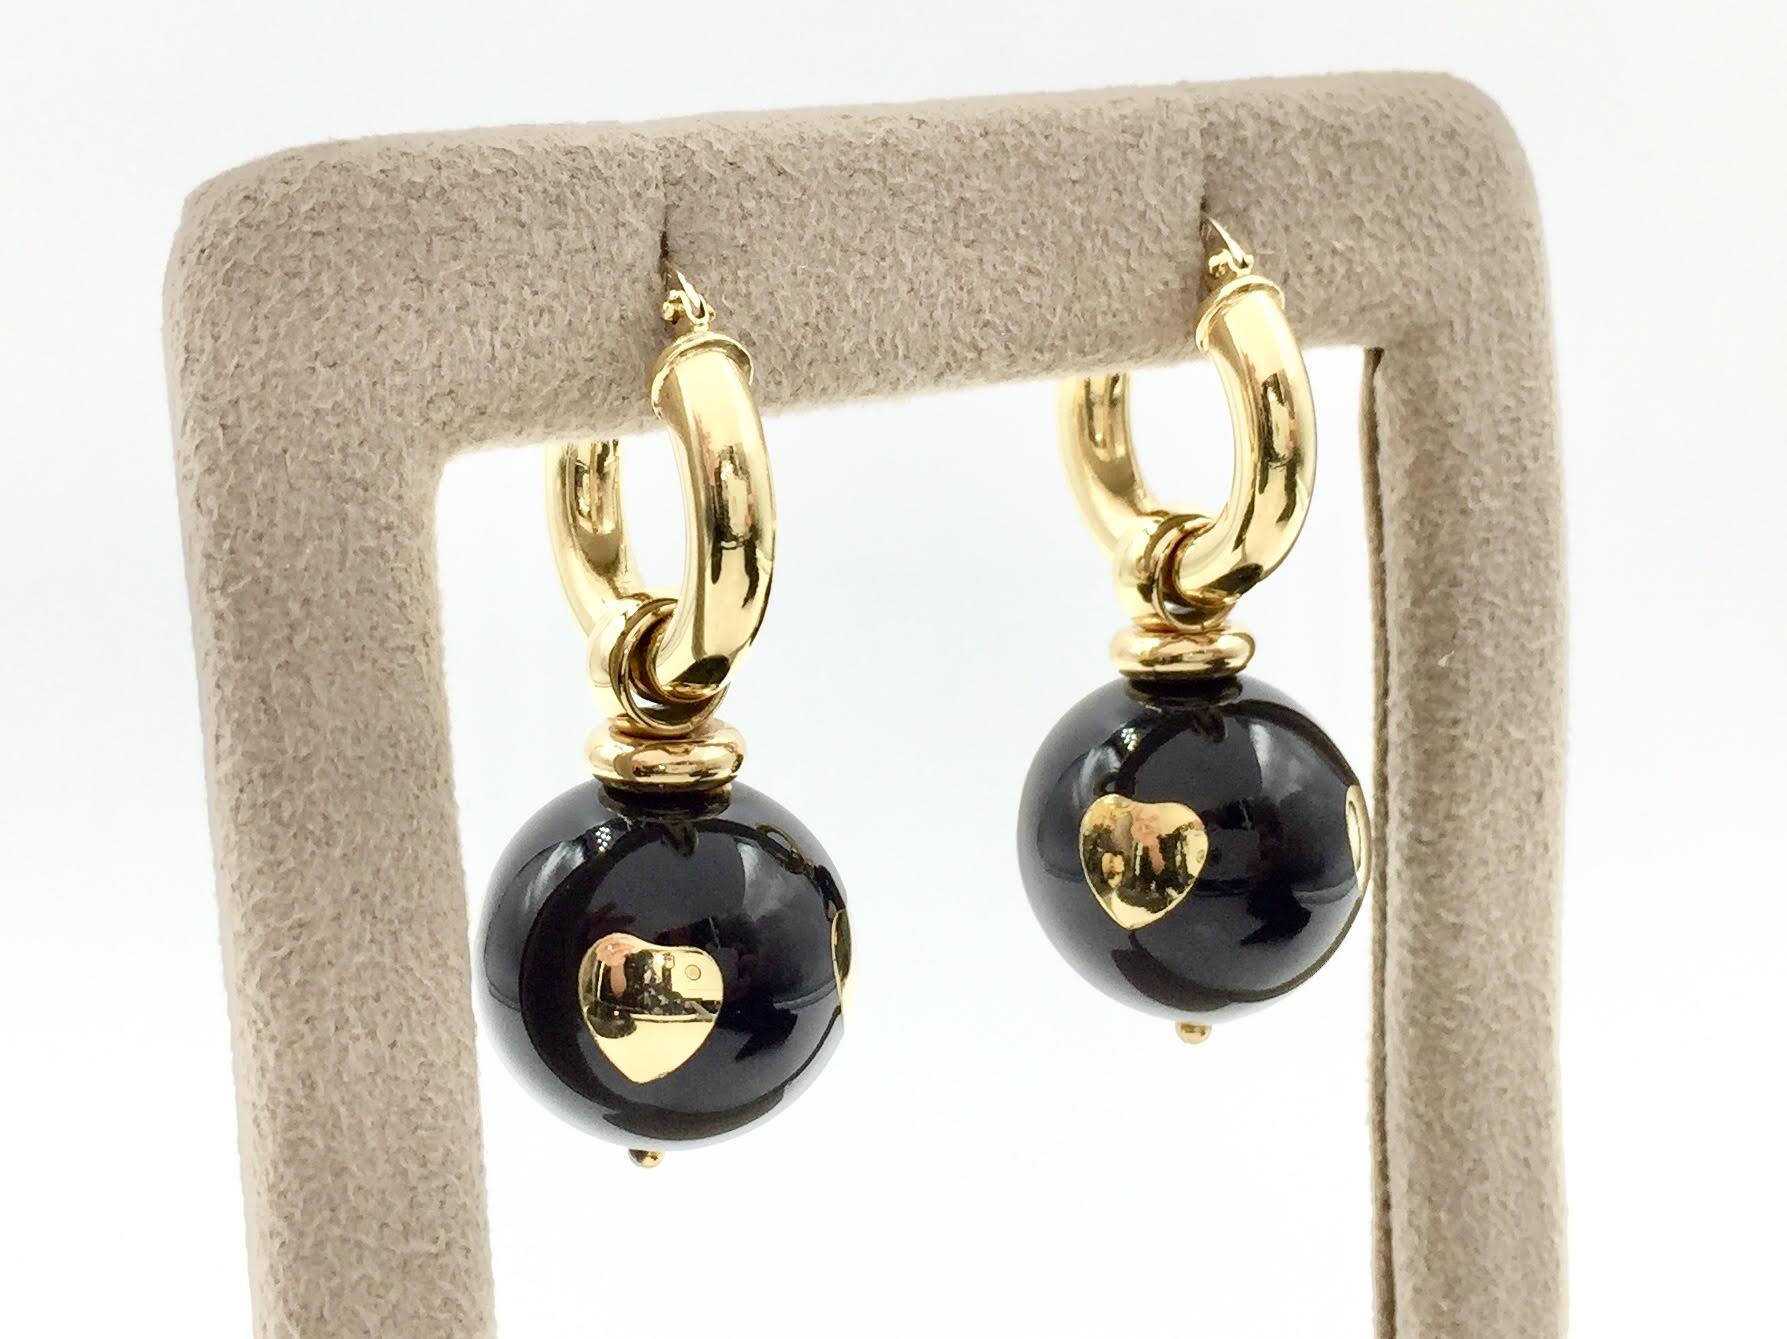 Made with high shine, polished 18k yellow gold. The 18mm round black enamel ball hangs securely from a wide hoop earring. The polished black enamel features four polished gold hearts. Earrings are light weight, comfortable enough for every day wear.